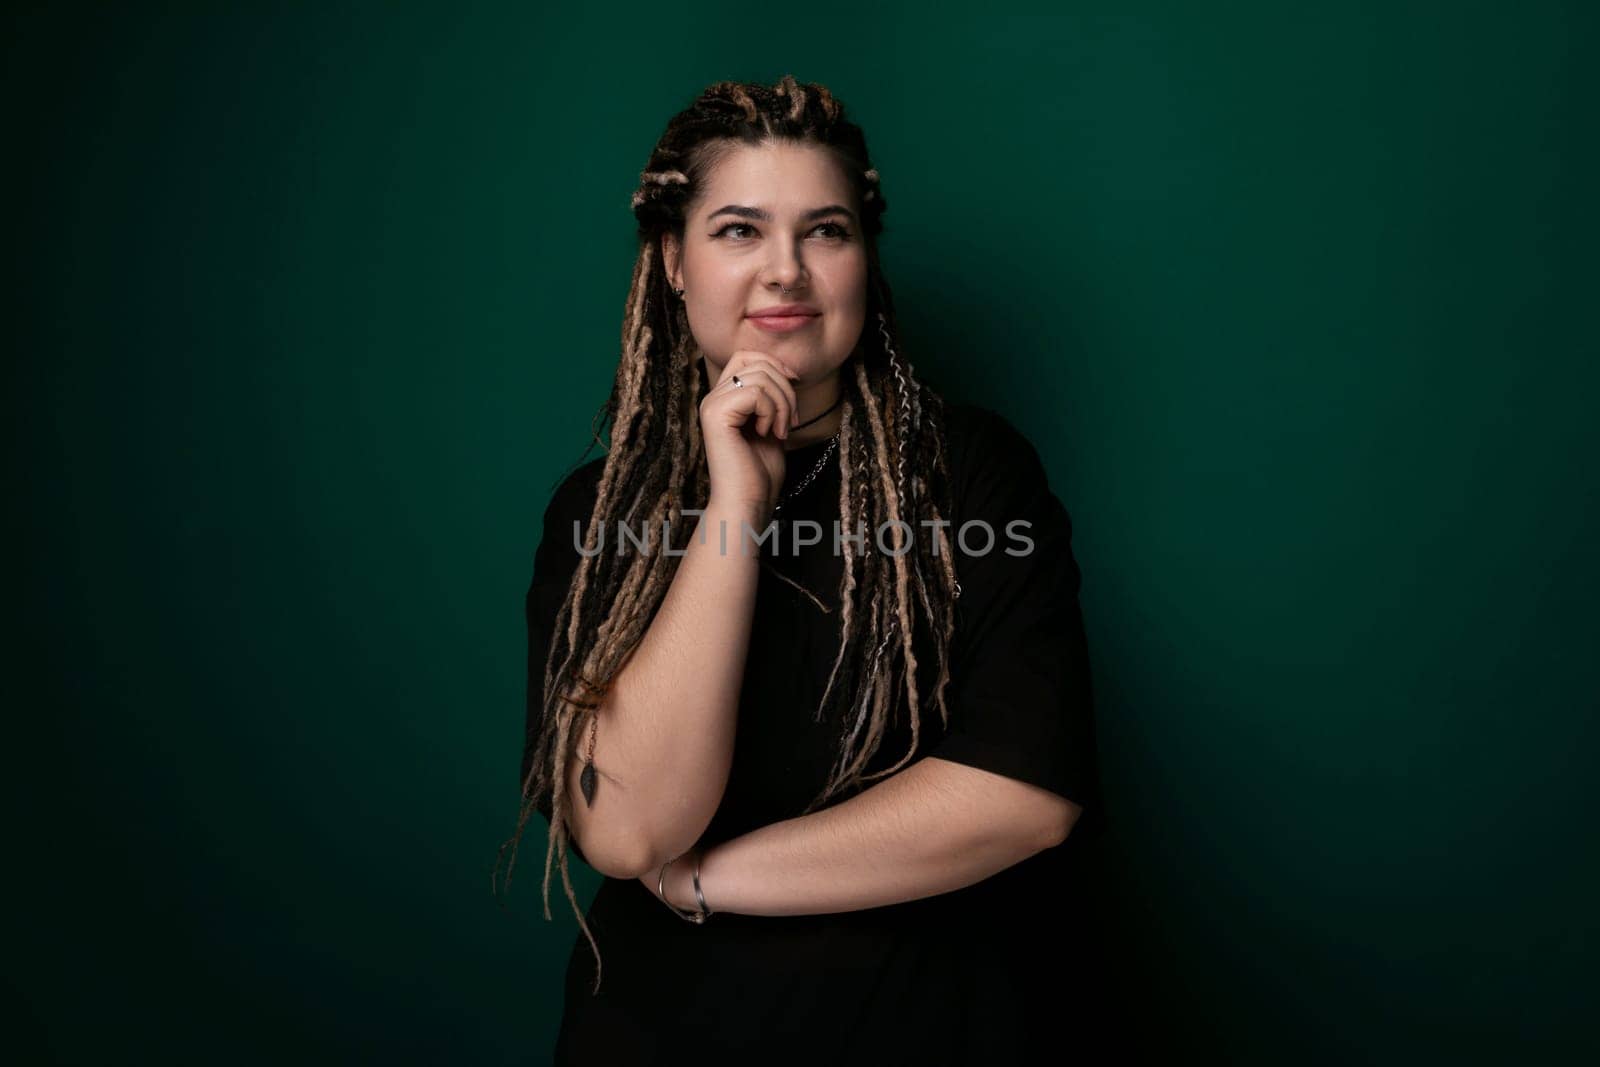 Woman With Dreadlocks Standing in Front of Green Wall by TRMK